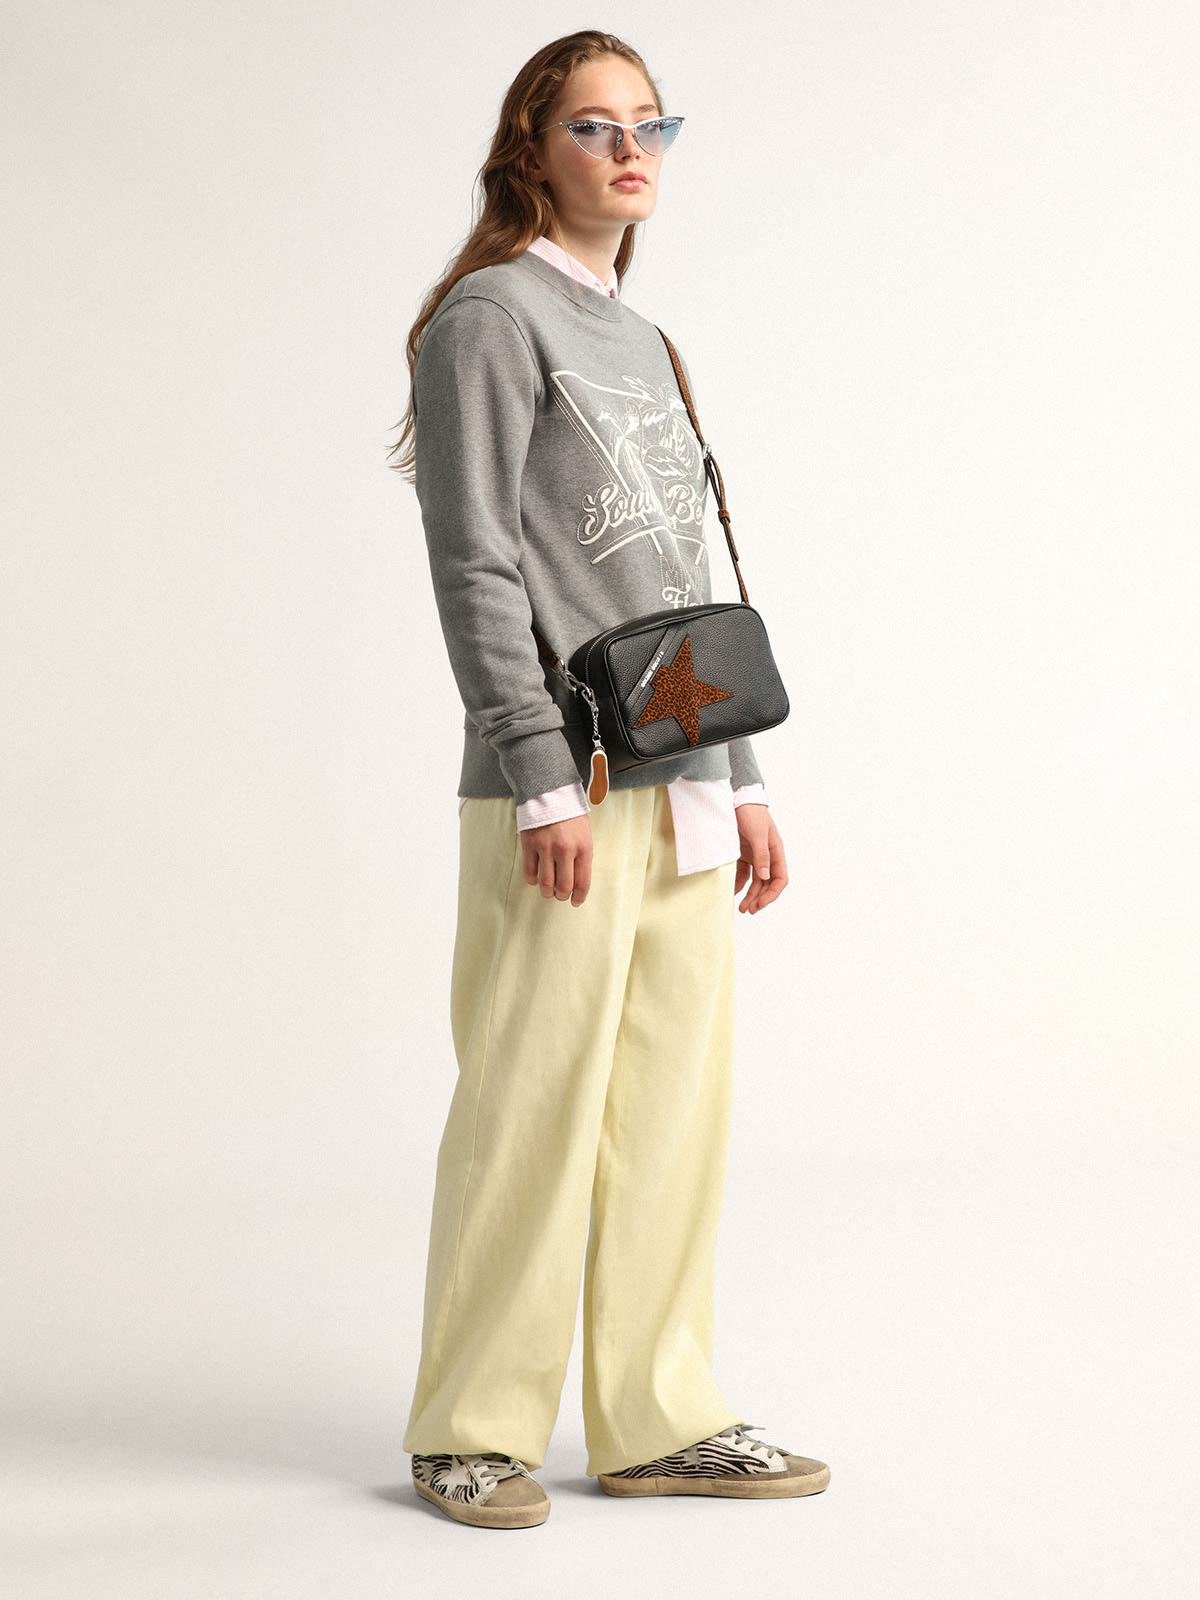 Golden Goose - Gray Journey Collection sweatshirt with palm print and South Beach lettering in white in 